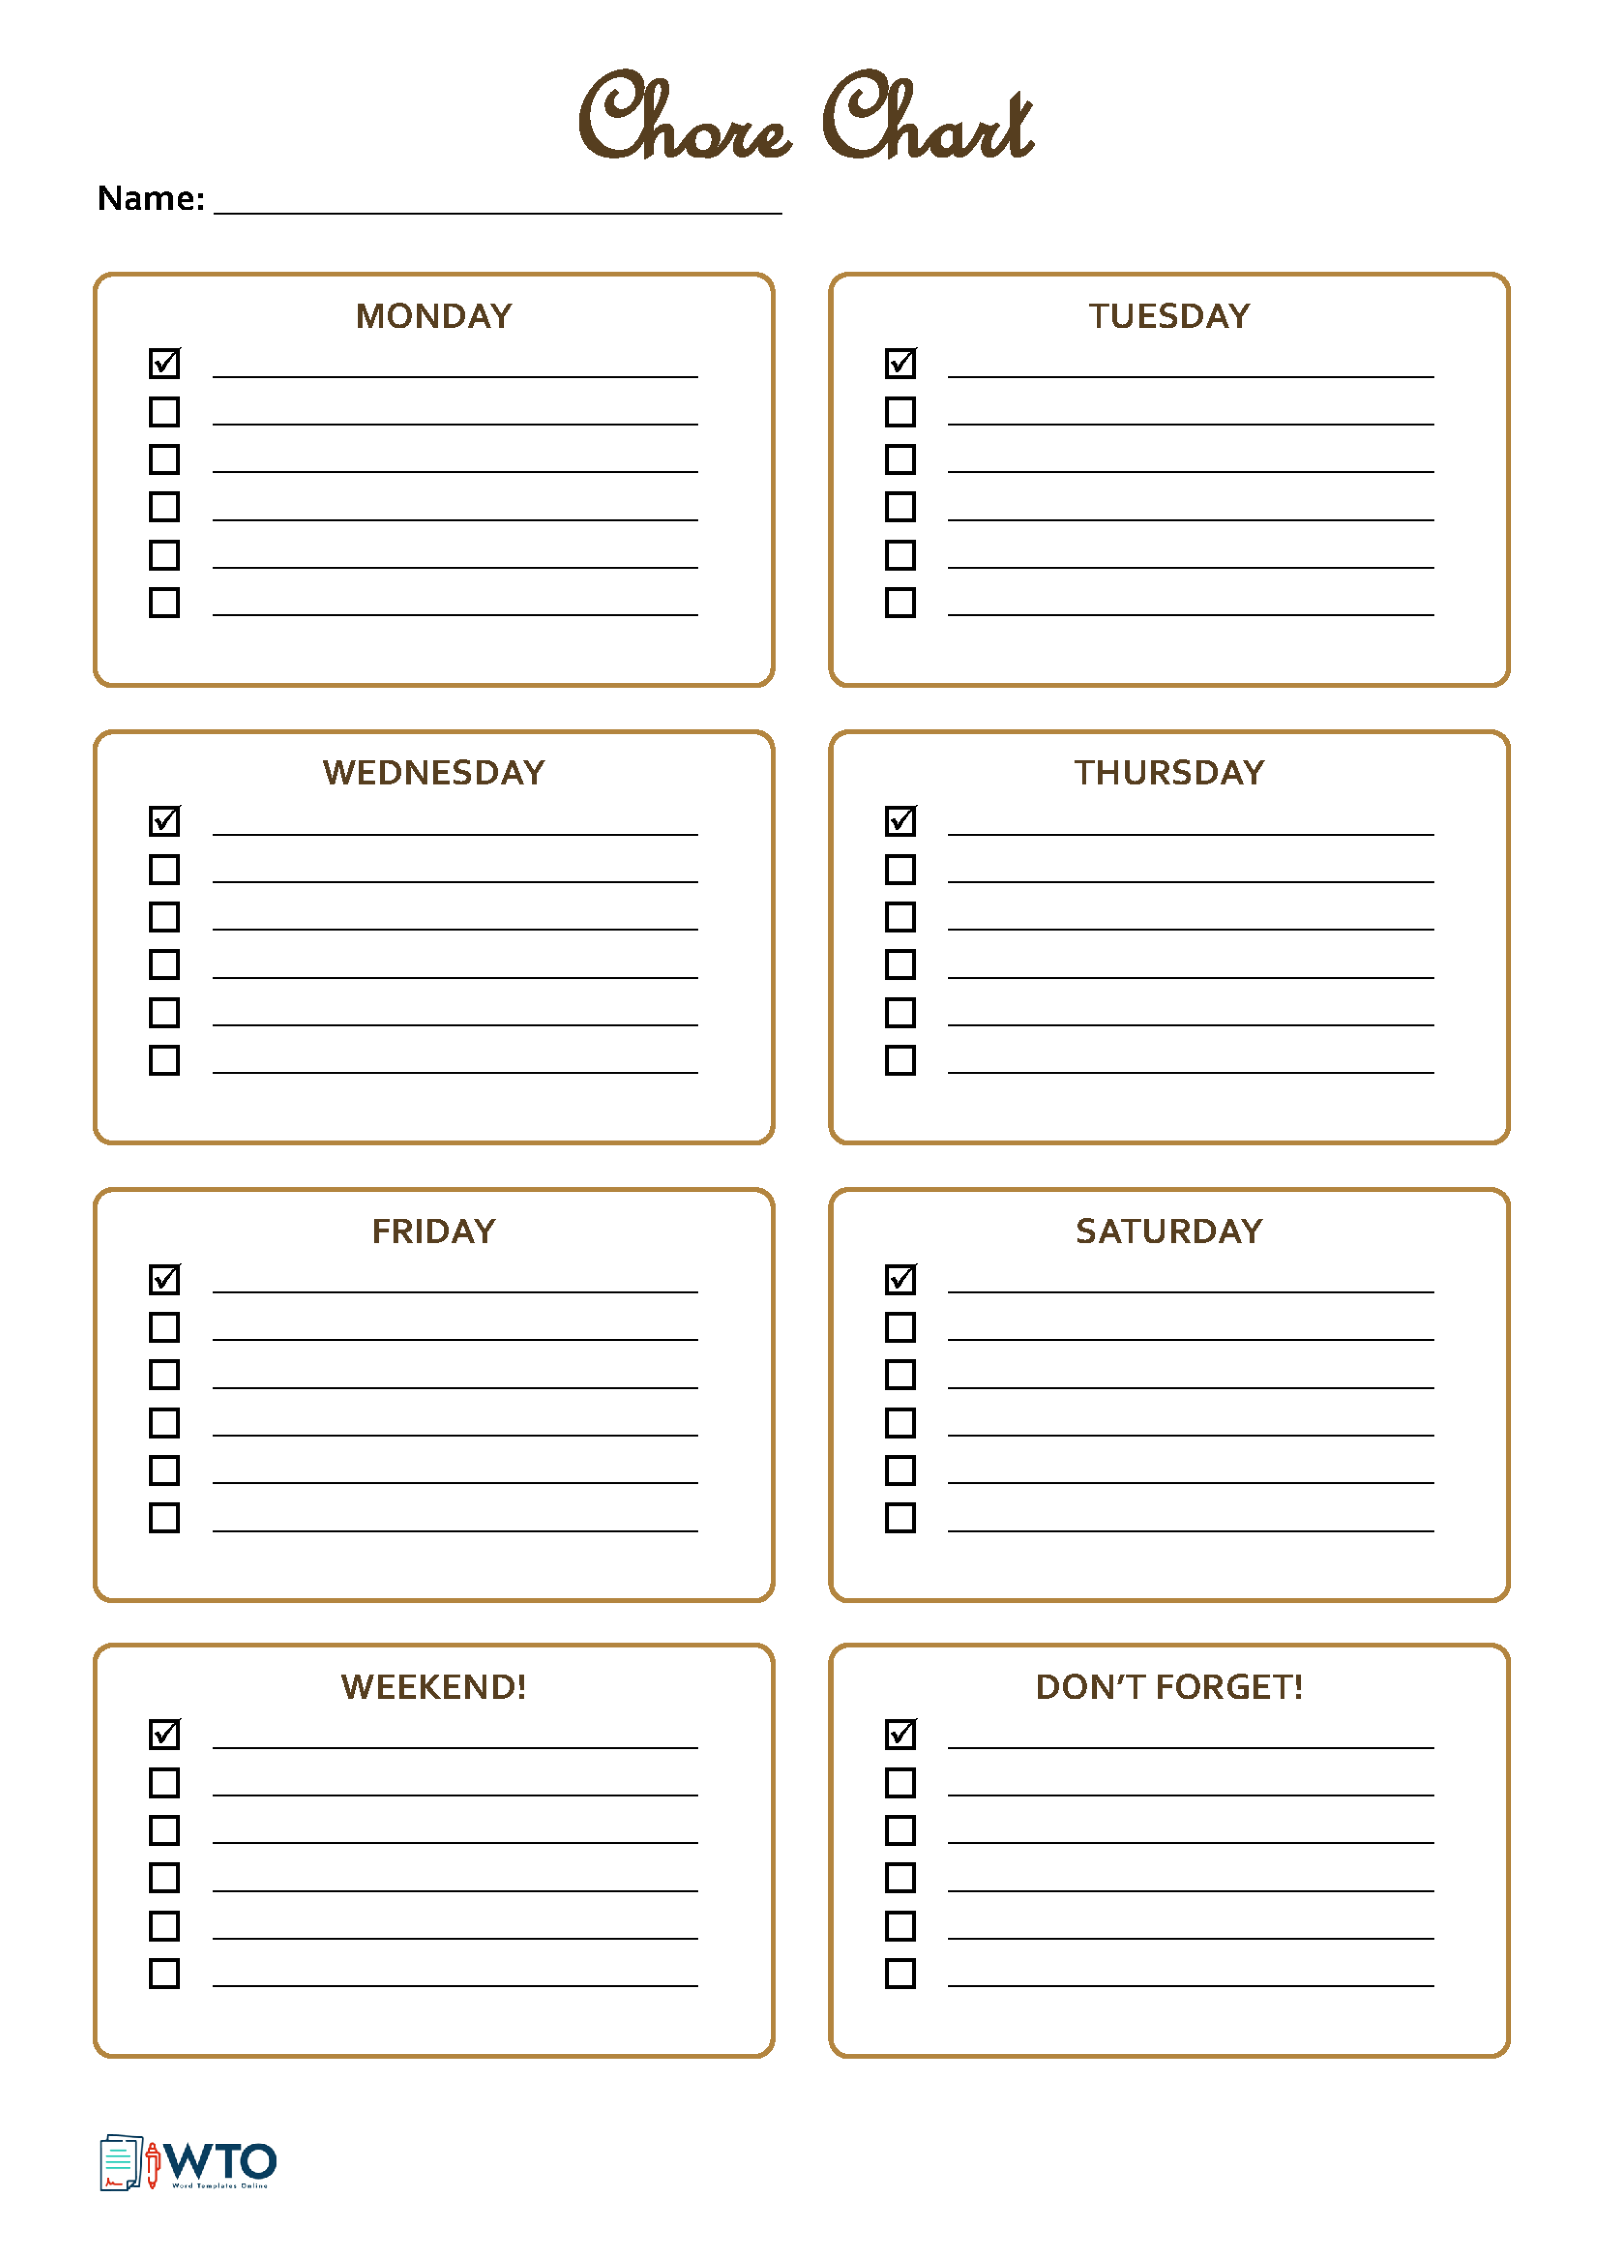 Example Chore Chart for Grown-Ups: Simplify Your Routine